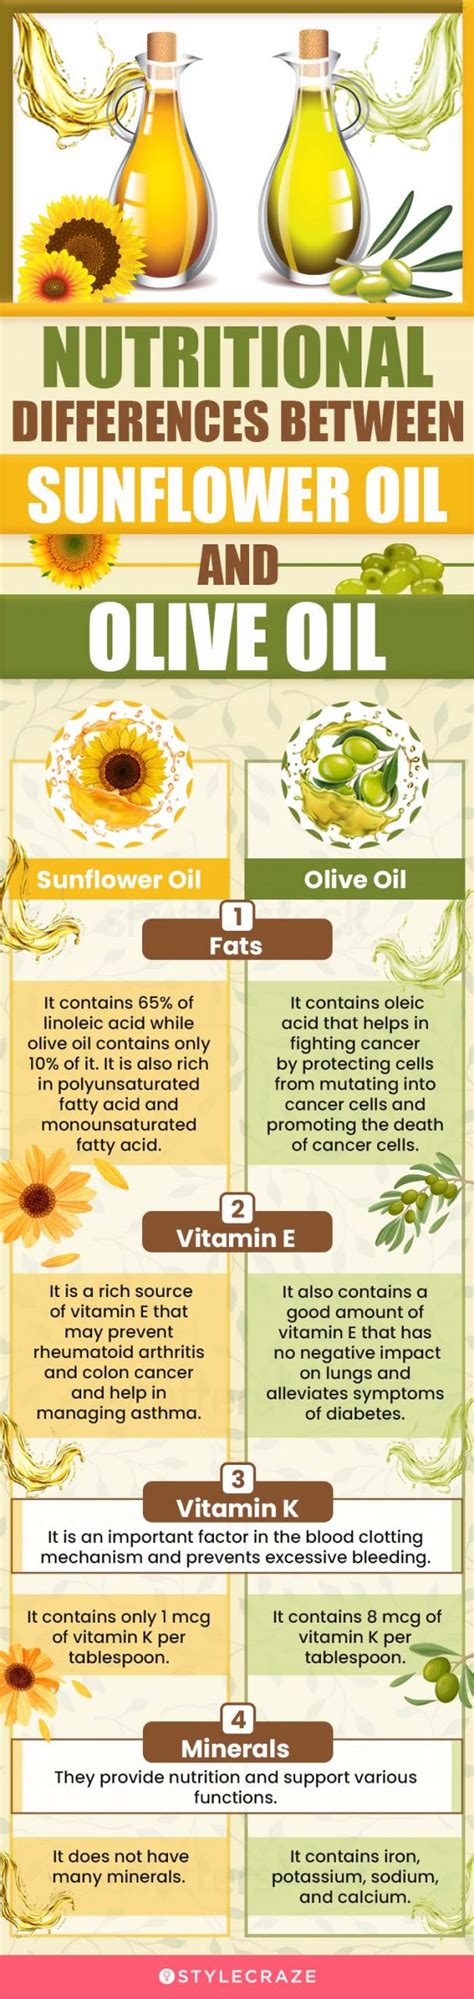 Is sunflower oil or olive oil better for you?